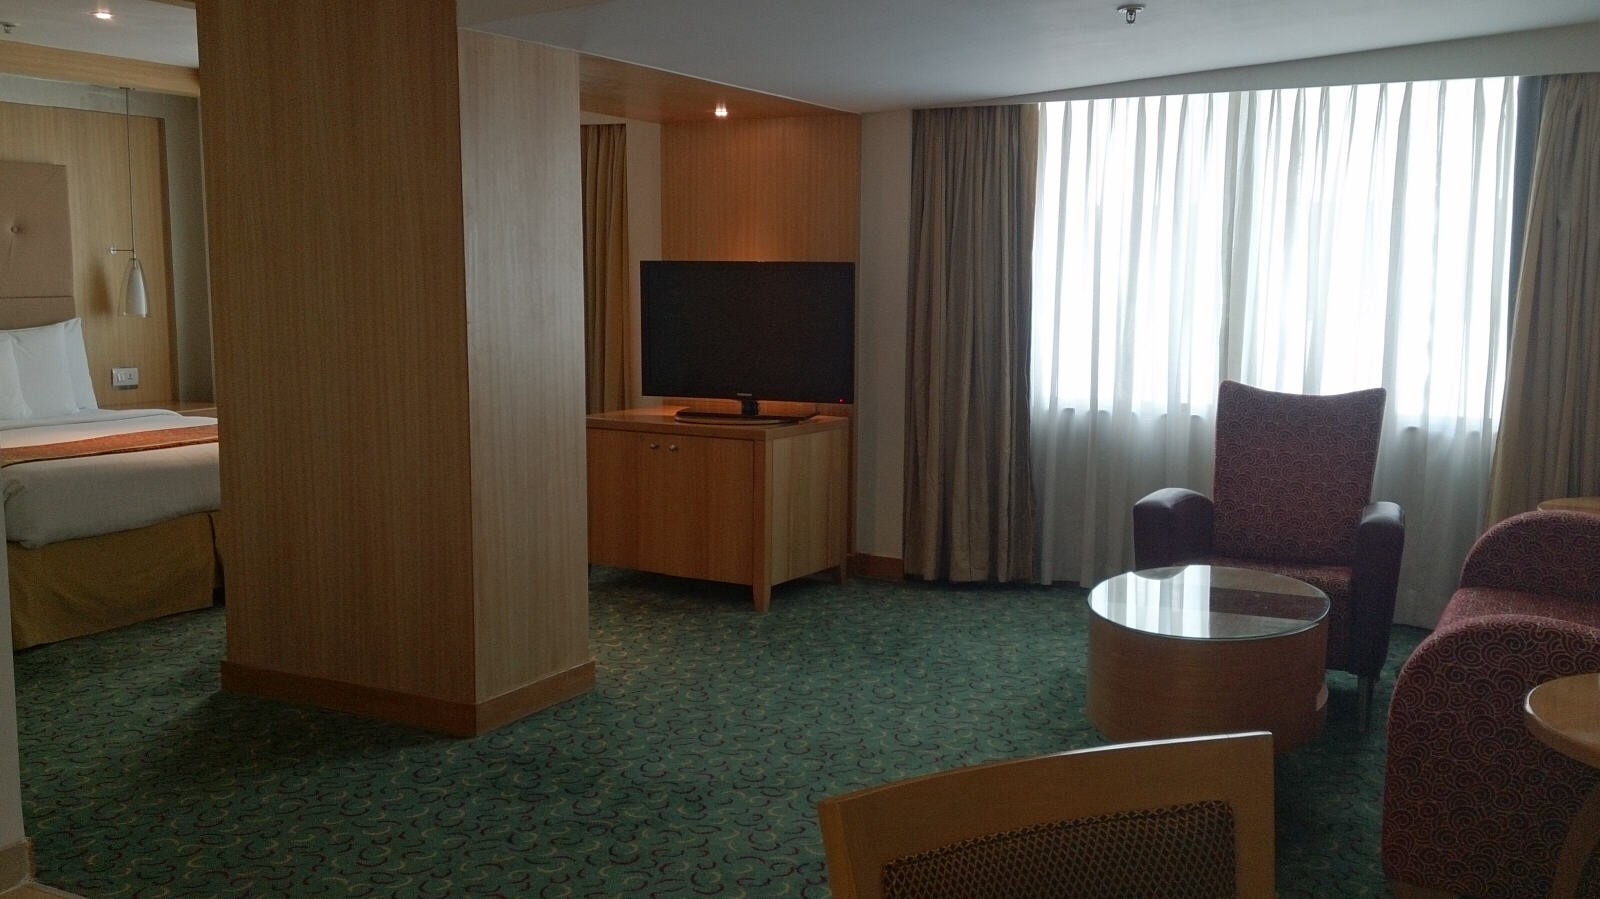 Our suite in the Chennai Marriott